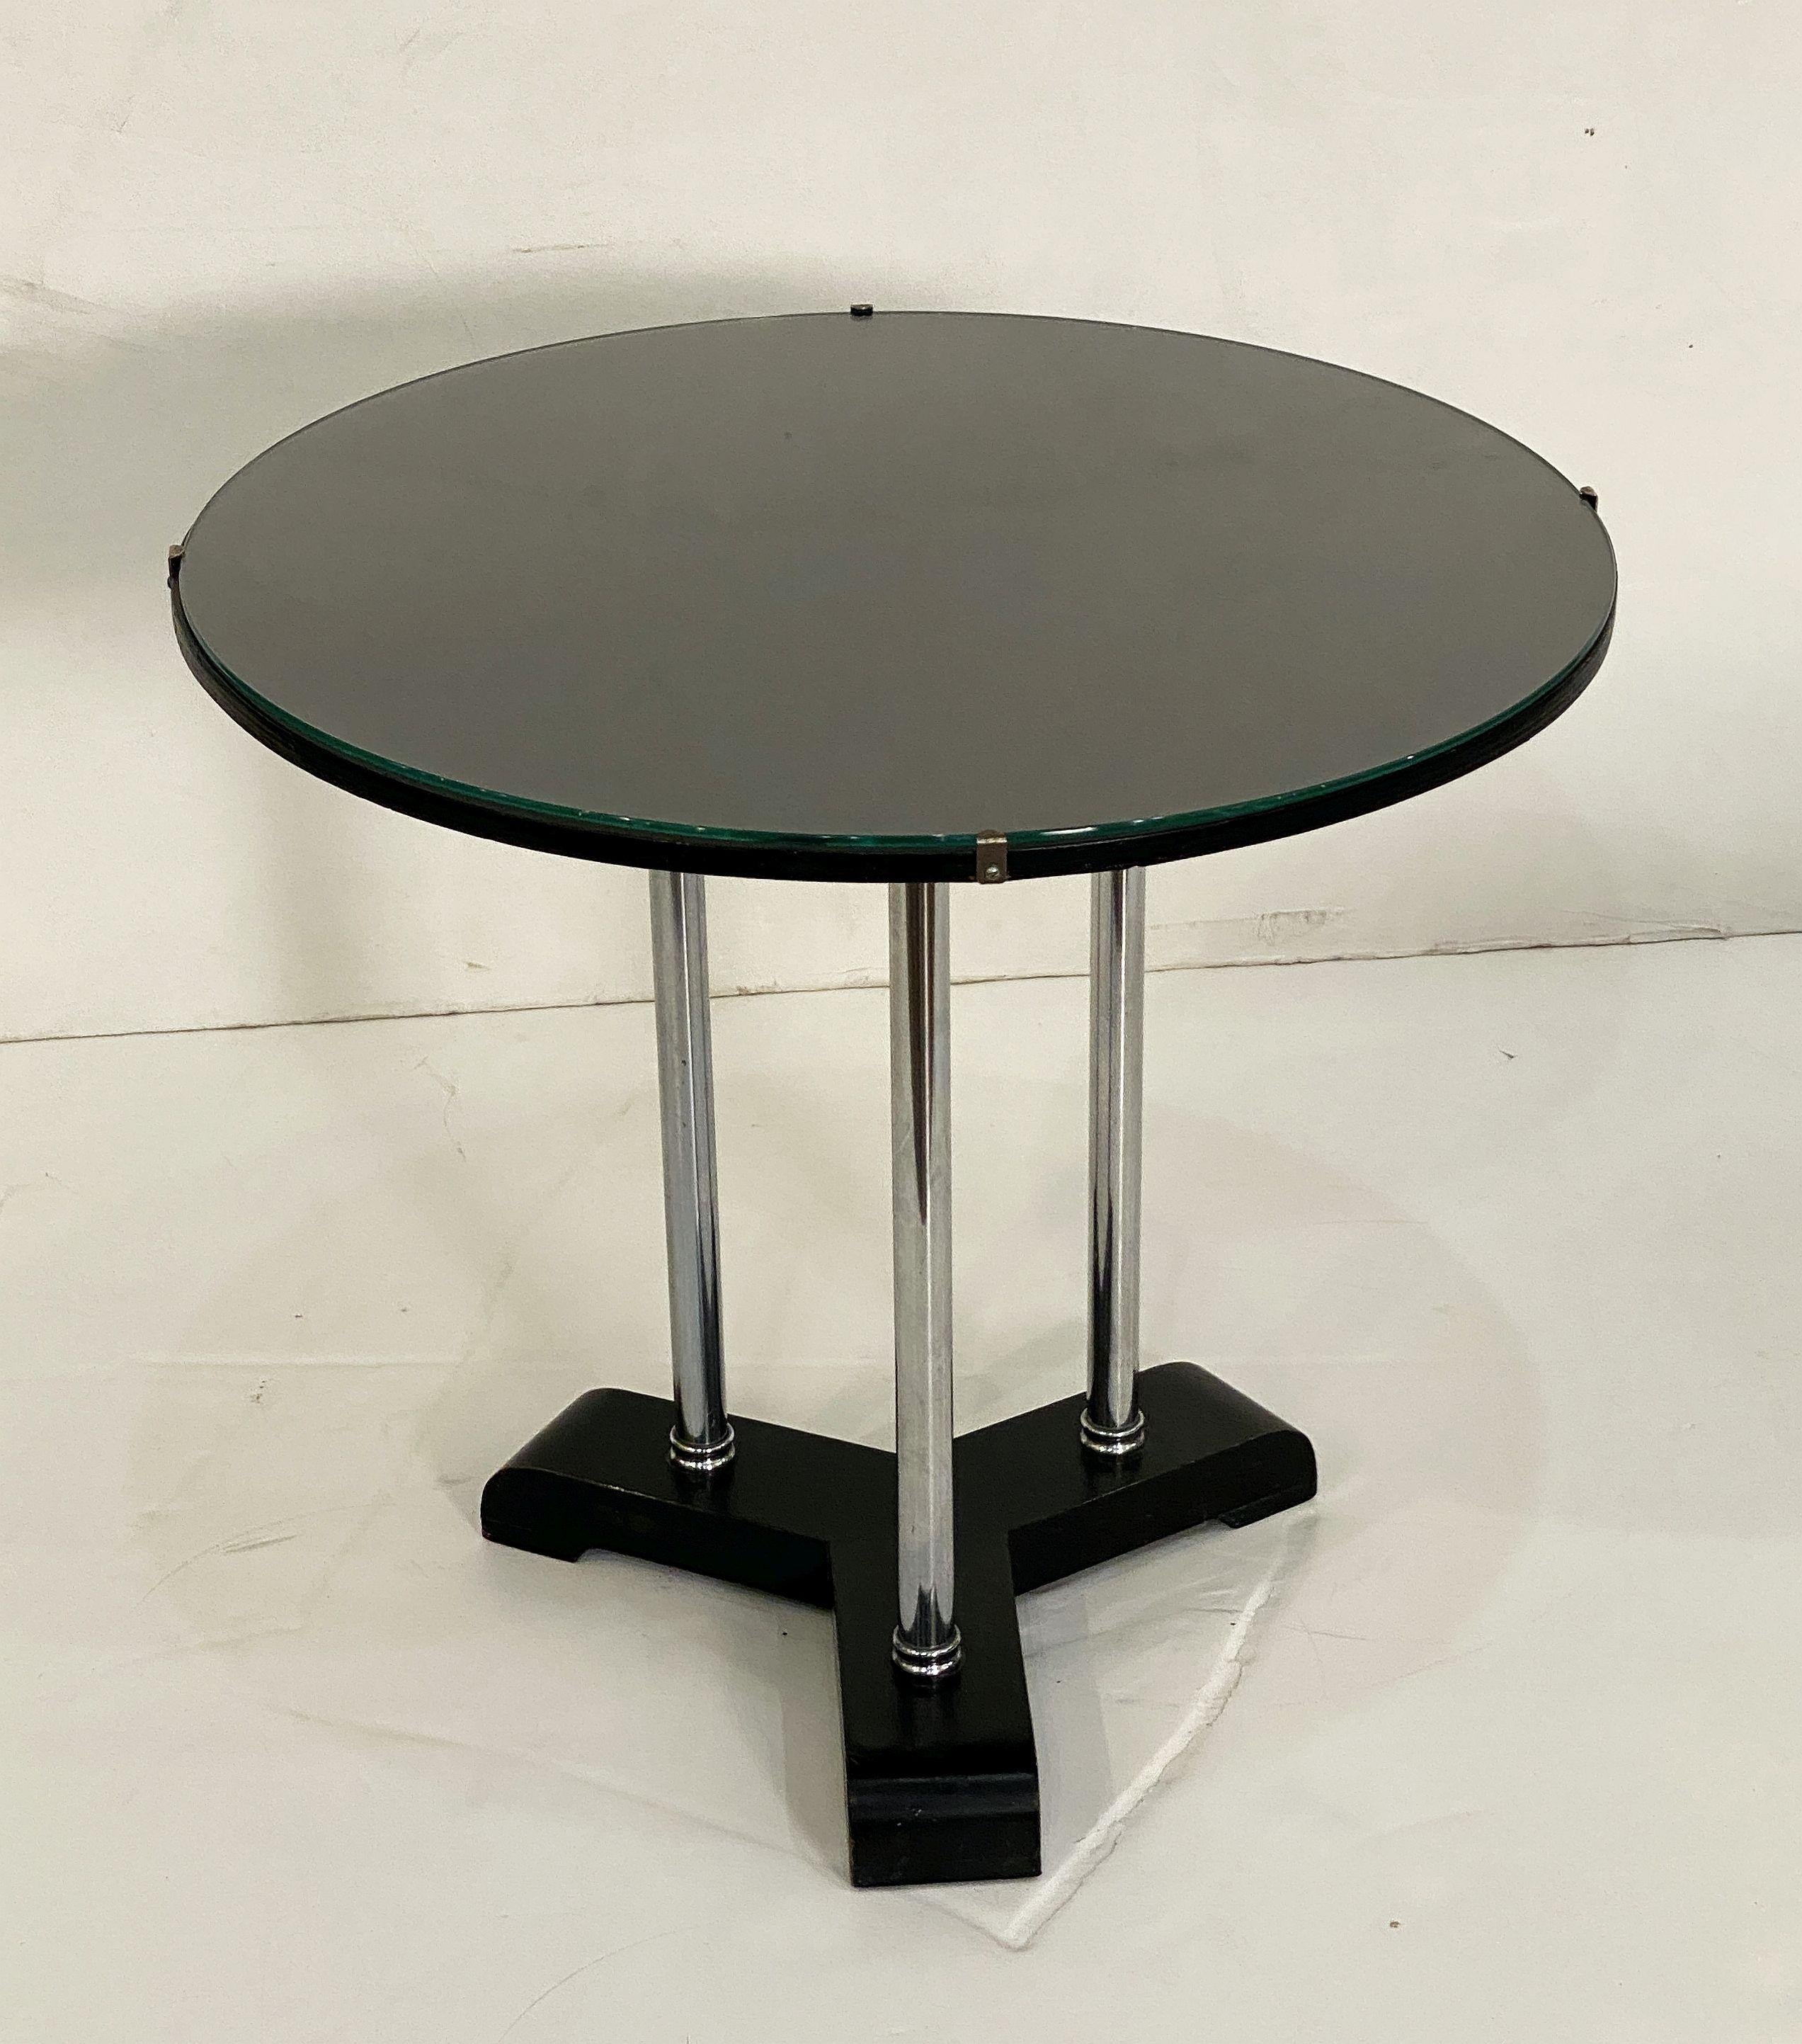 English Art Deco Round Drinks Tripod Table of Chrome, Ebonized Wood, and Glass For Sale 3